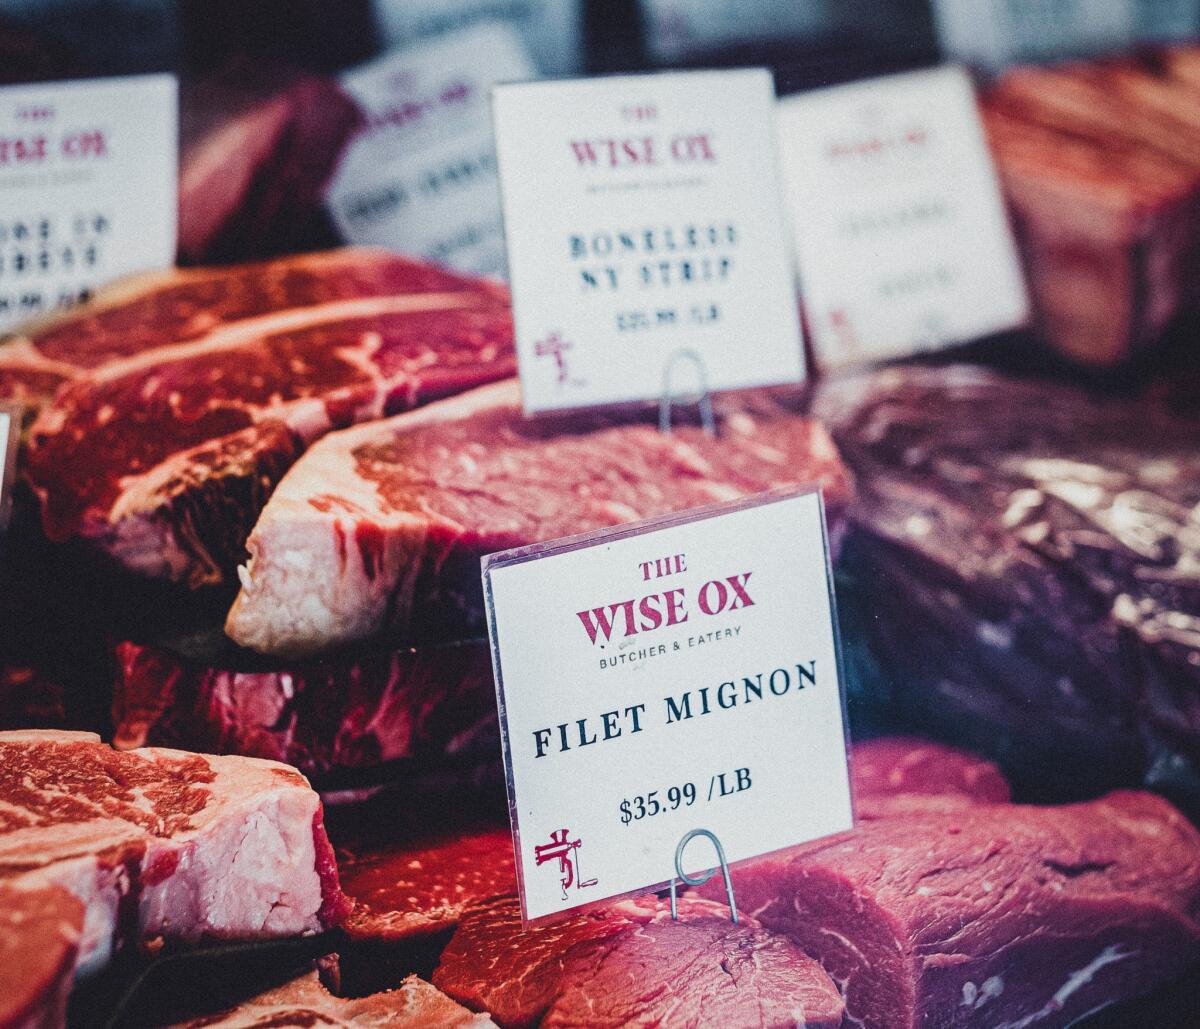 Beef for sale at The Wise Ox Butcher & Eatery in North Park, which opened in September 2020.